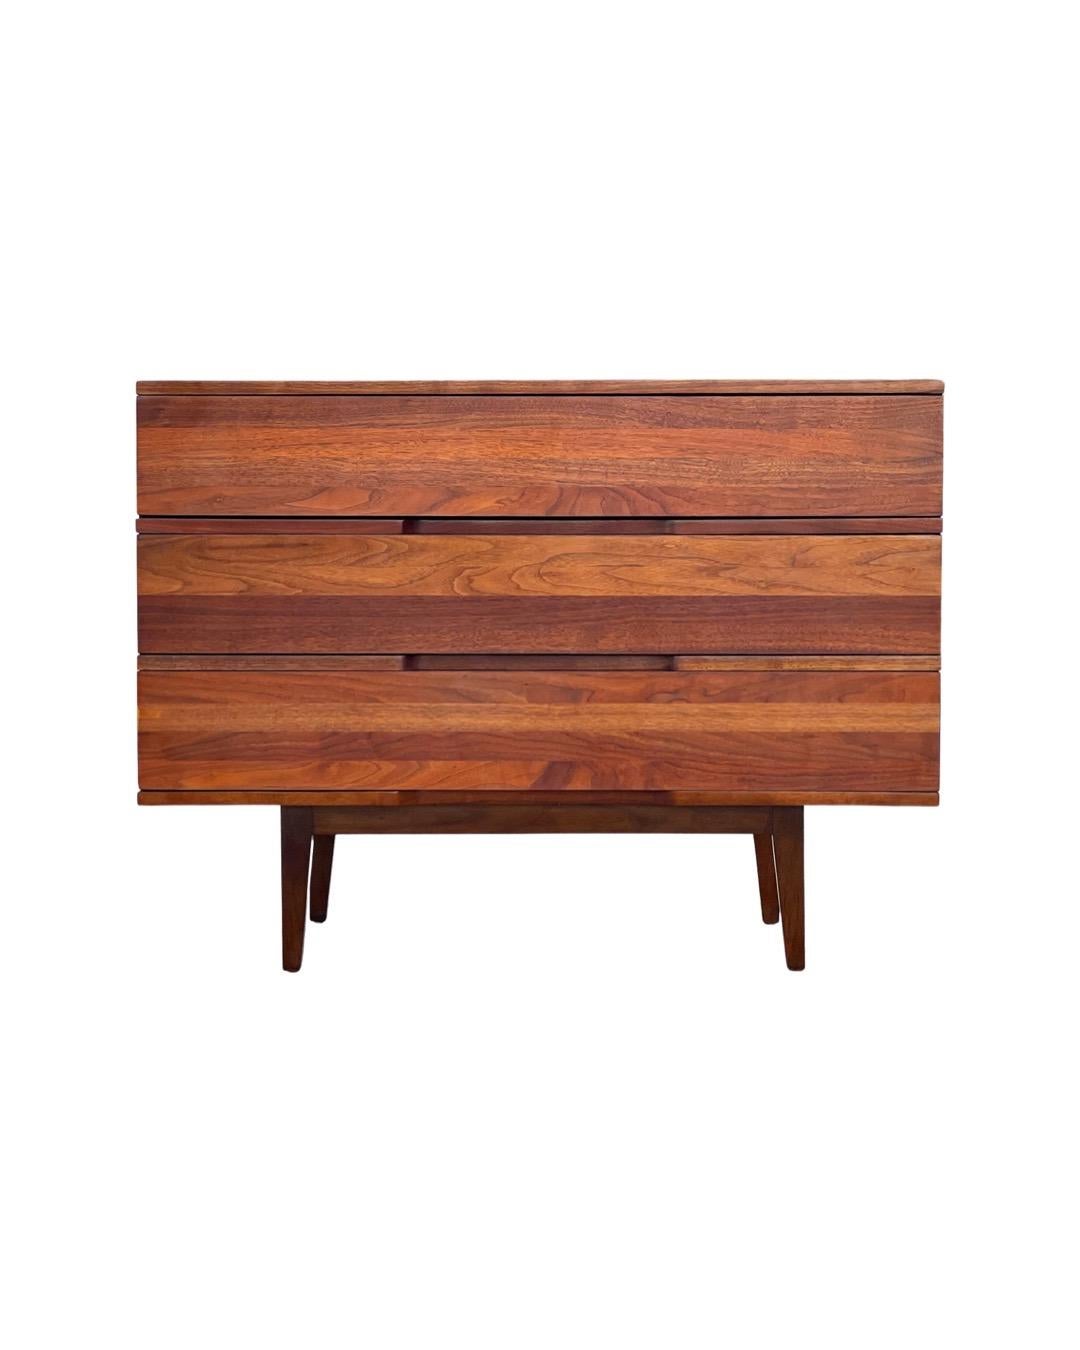 American Pair of Mel Smilow for Smilow-Thielle Midcentury Bachelors Chests in Walnut